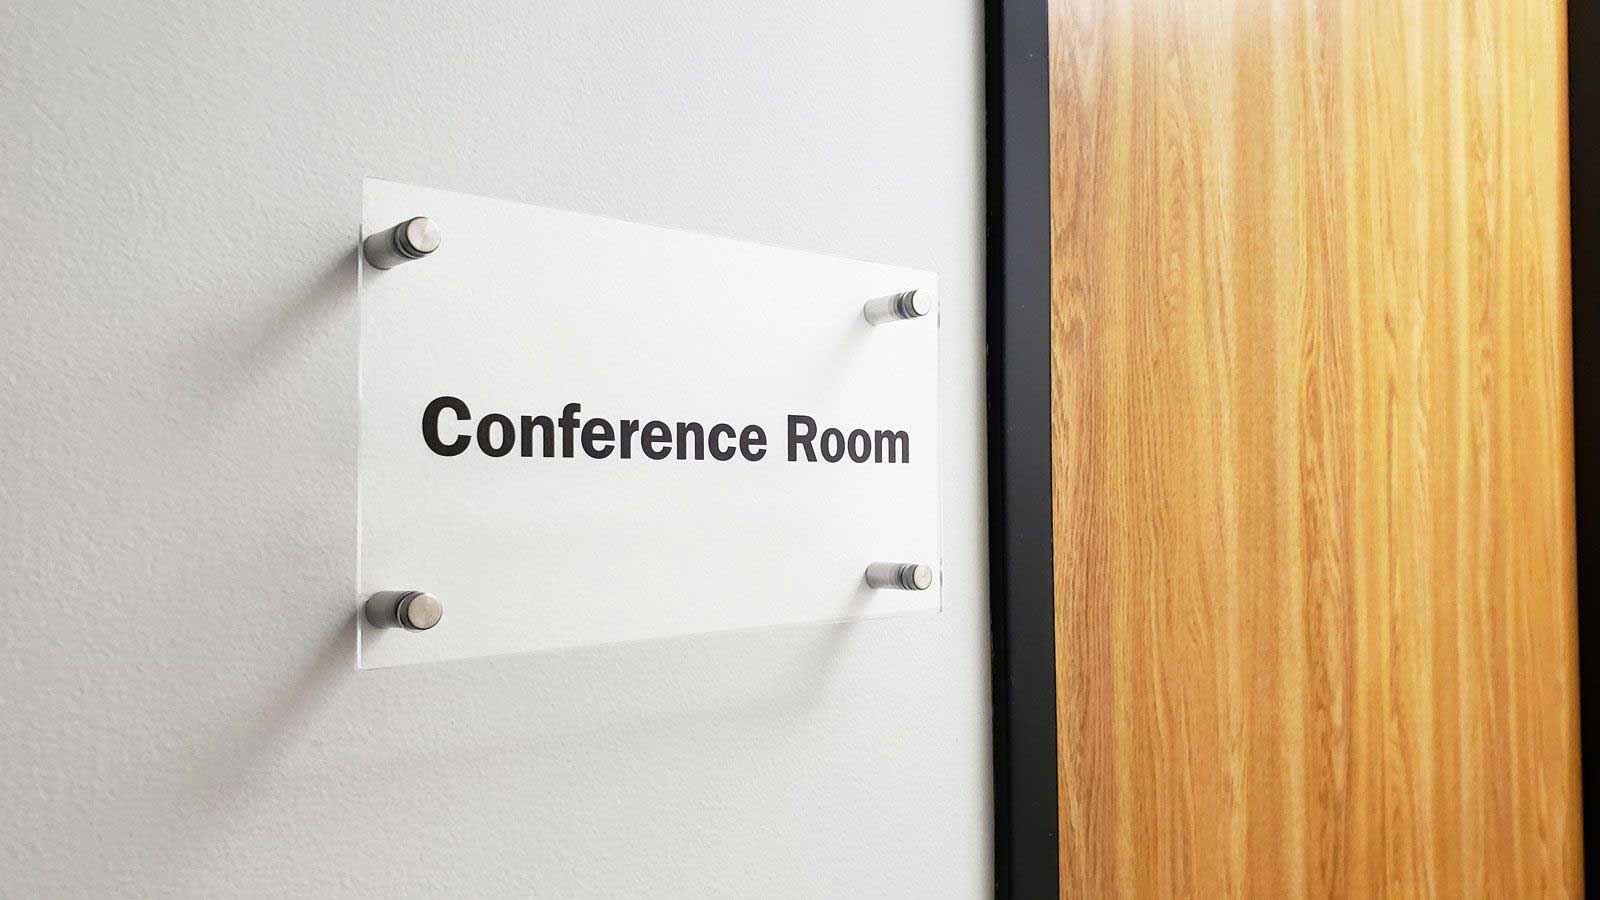 standoff mounted conference room acrylic sign